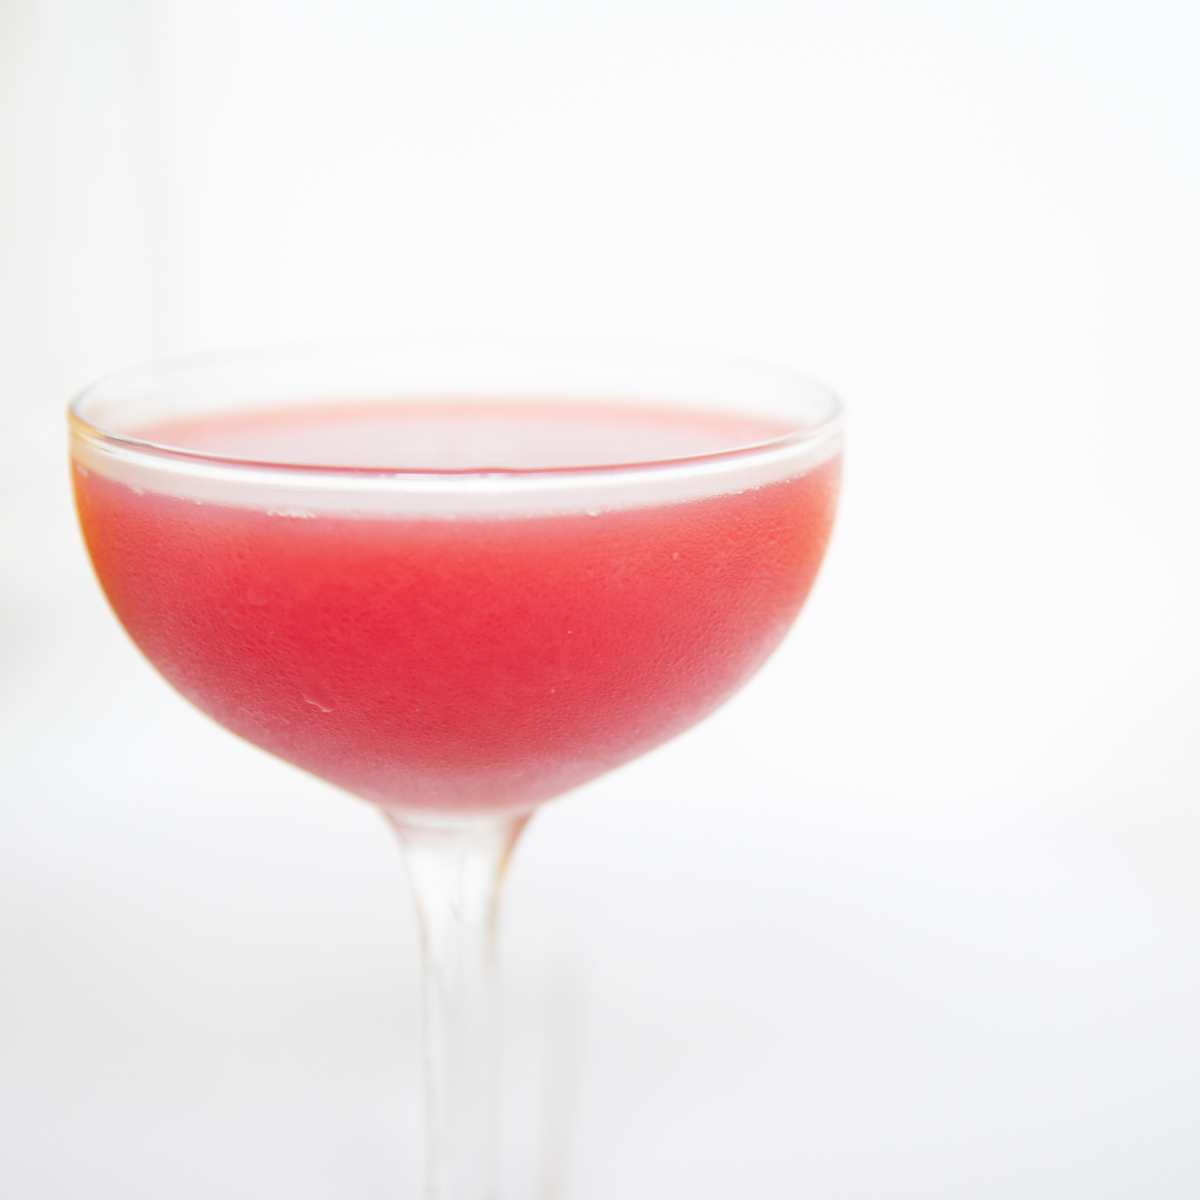 rosie's cocktail featured image